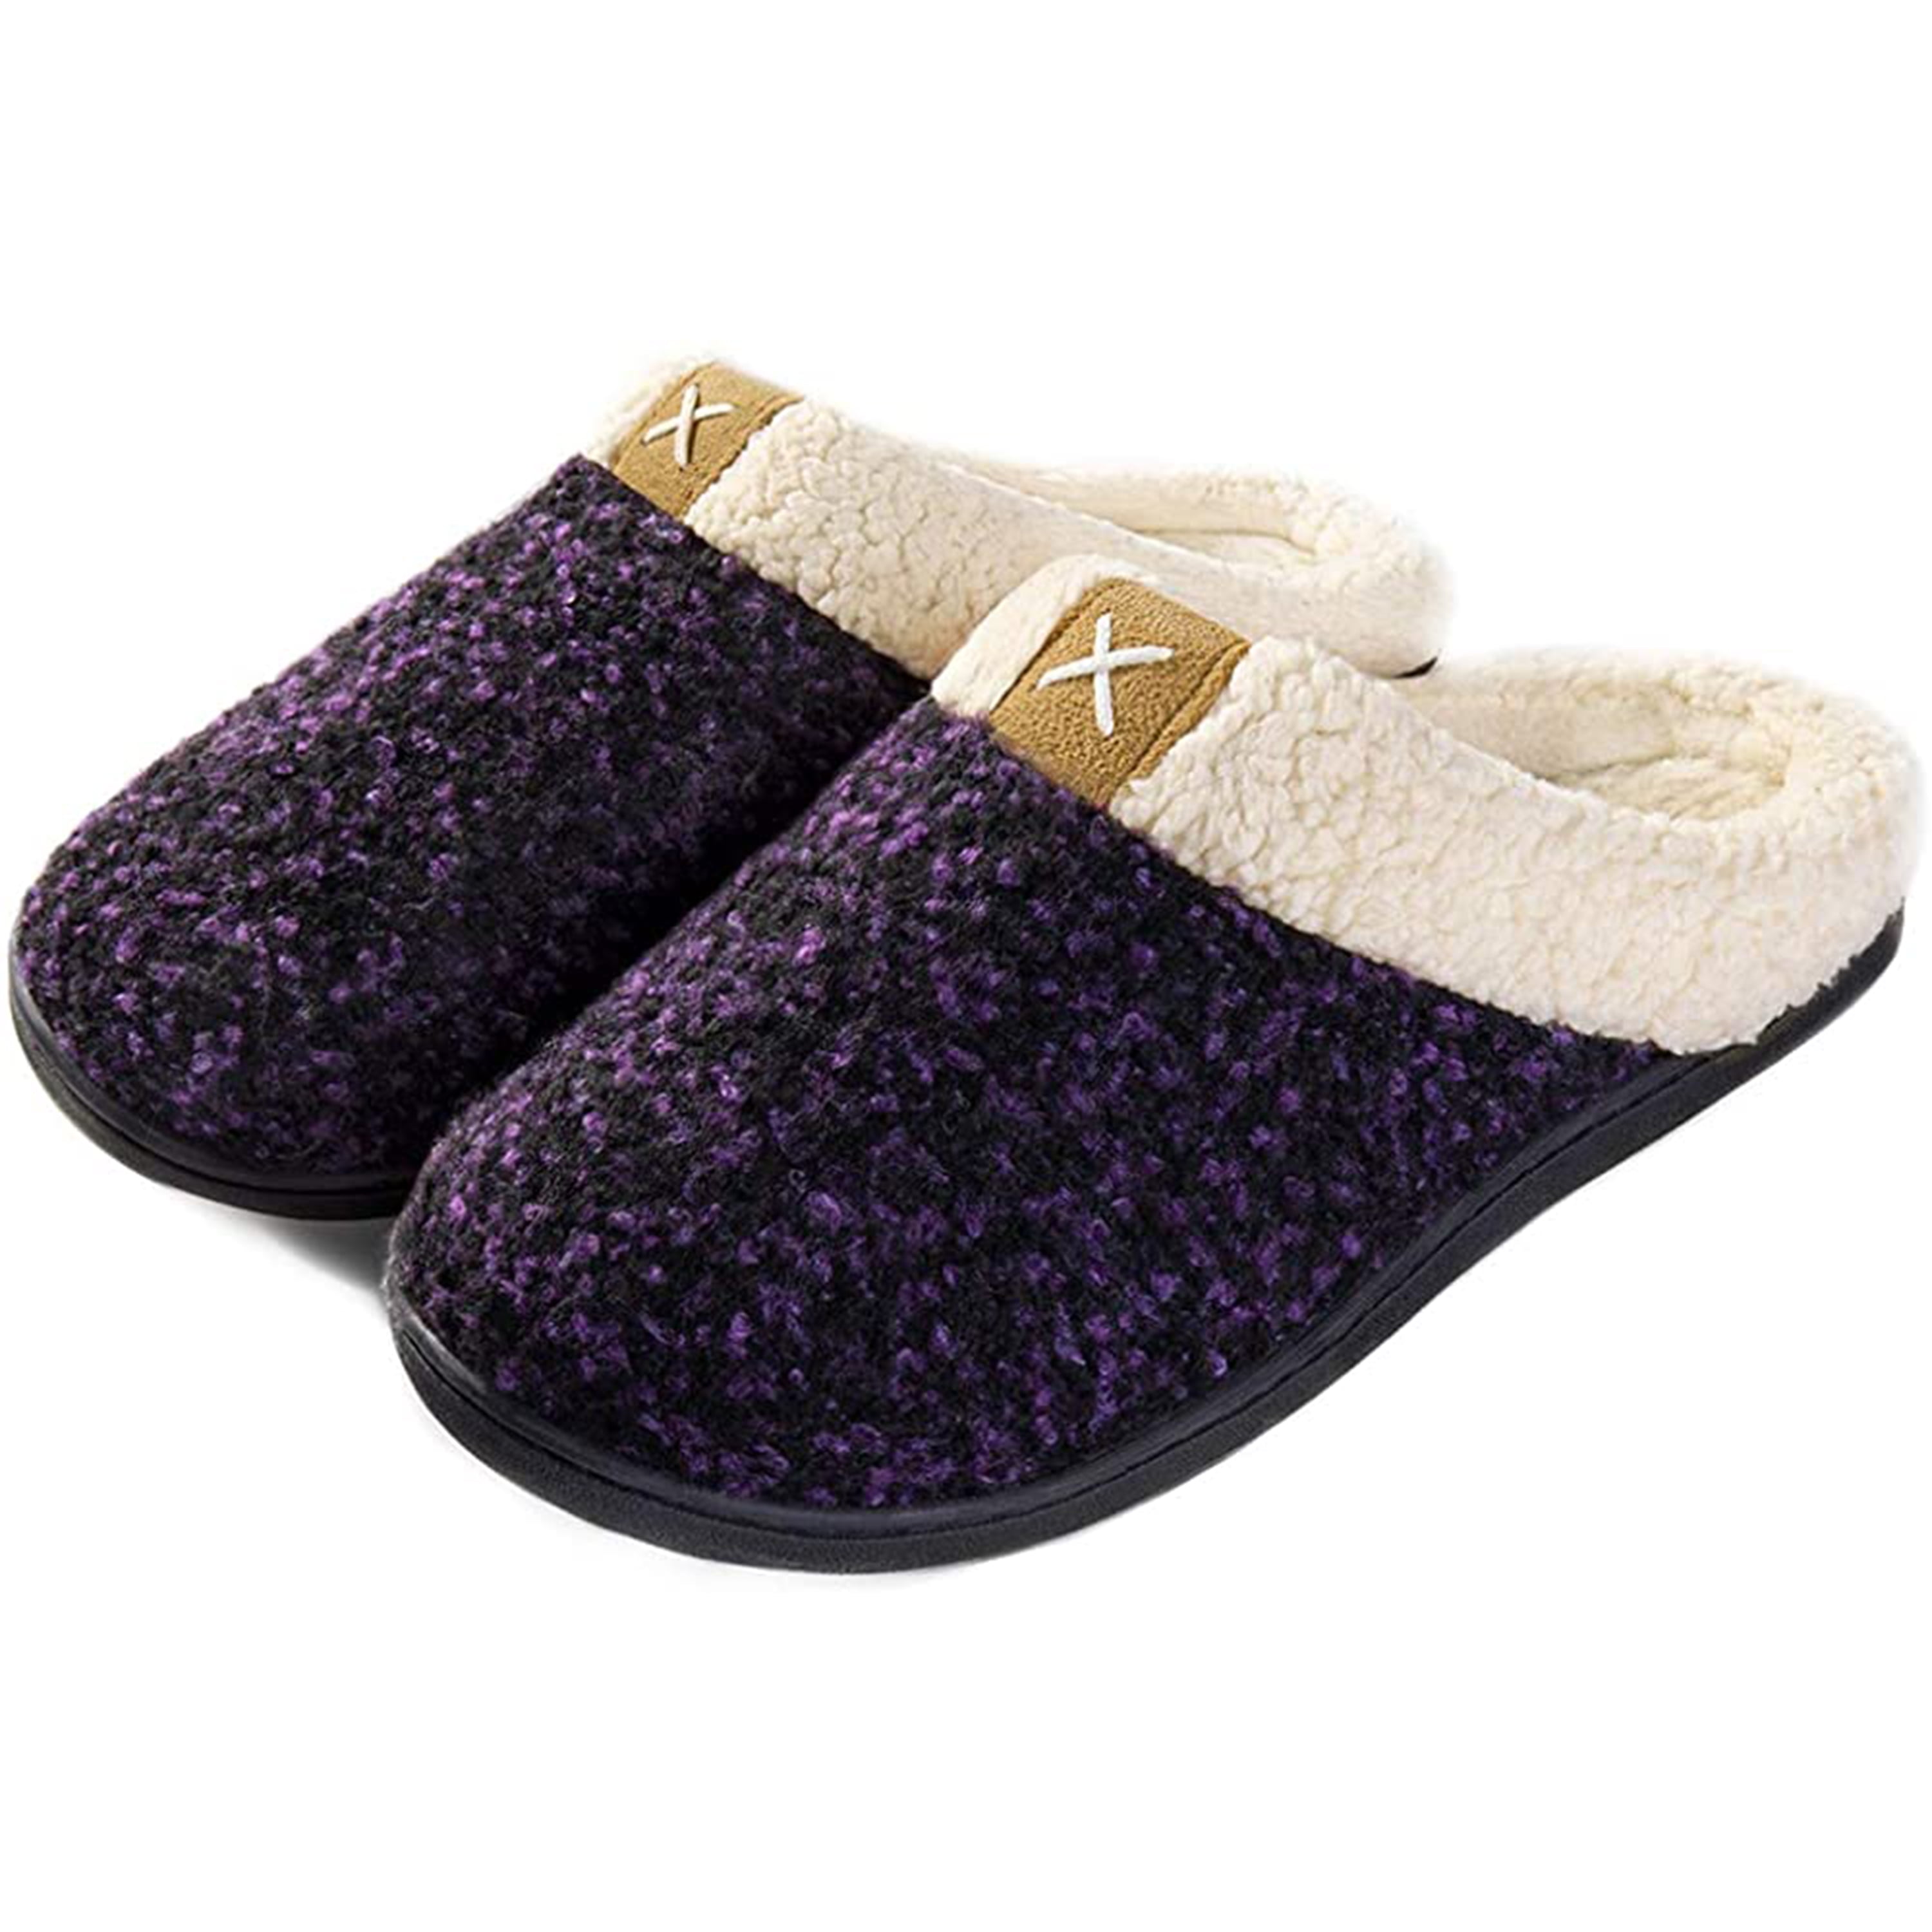 Womens Mens Winter House Slippers Memory Comfort Plush Fleece Lined Warm Cosy Indoor Outdoor Home Non Slip Slippers 